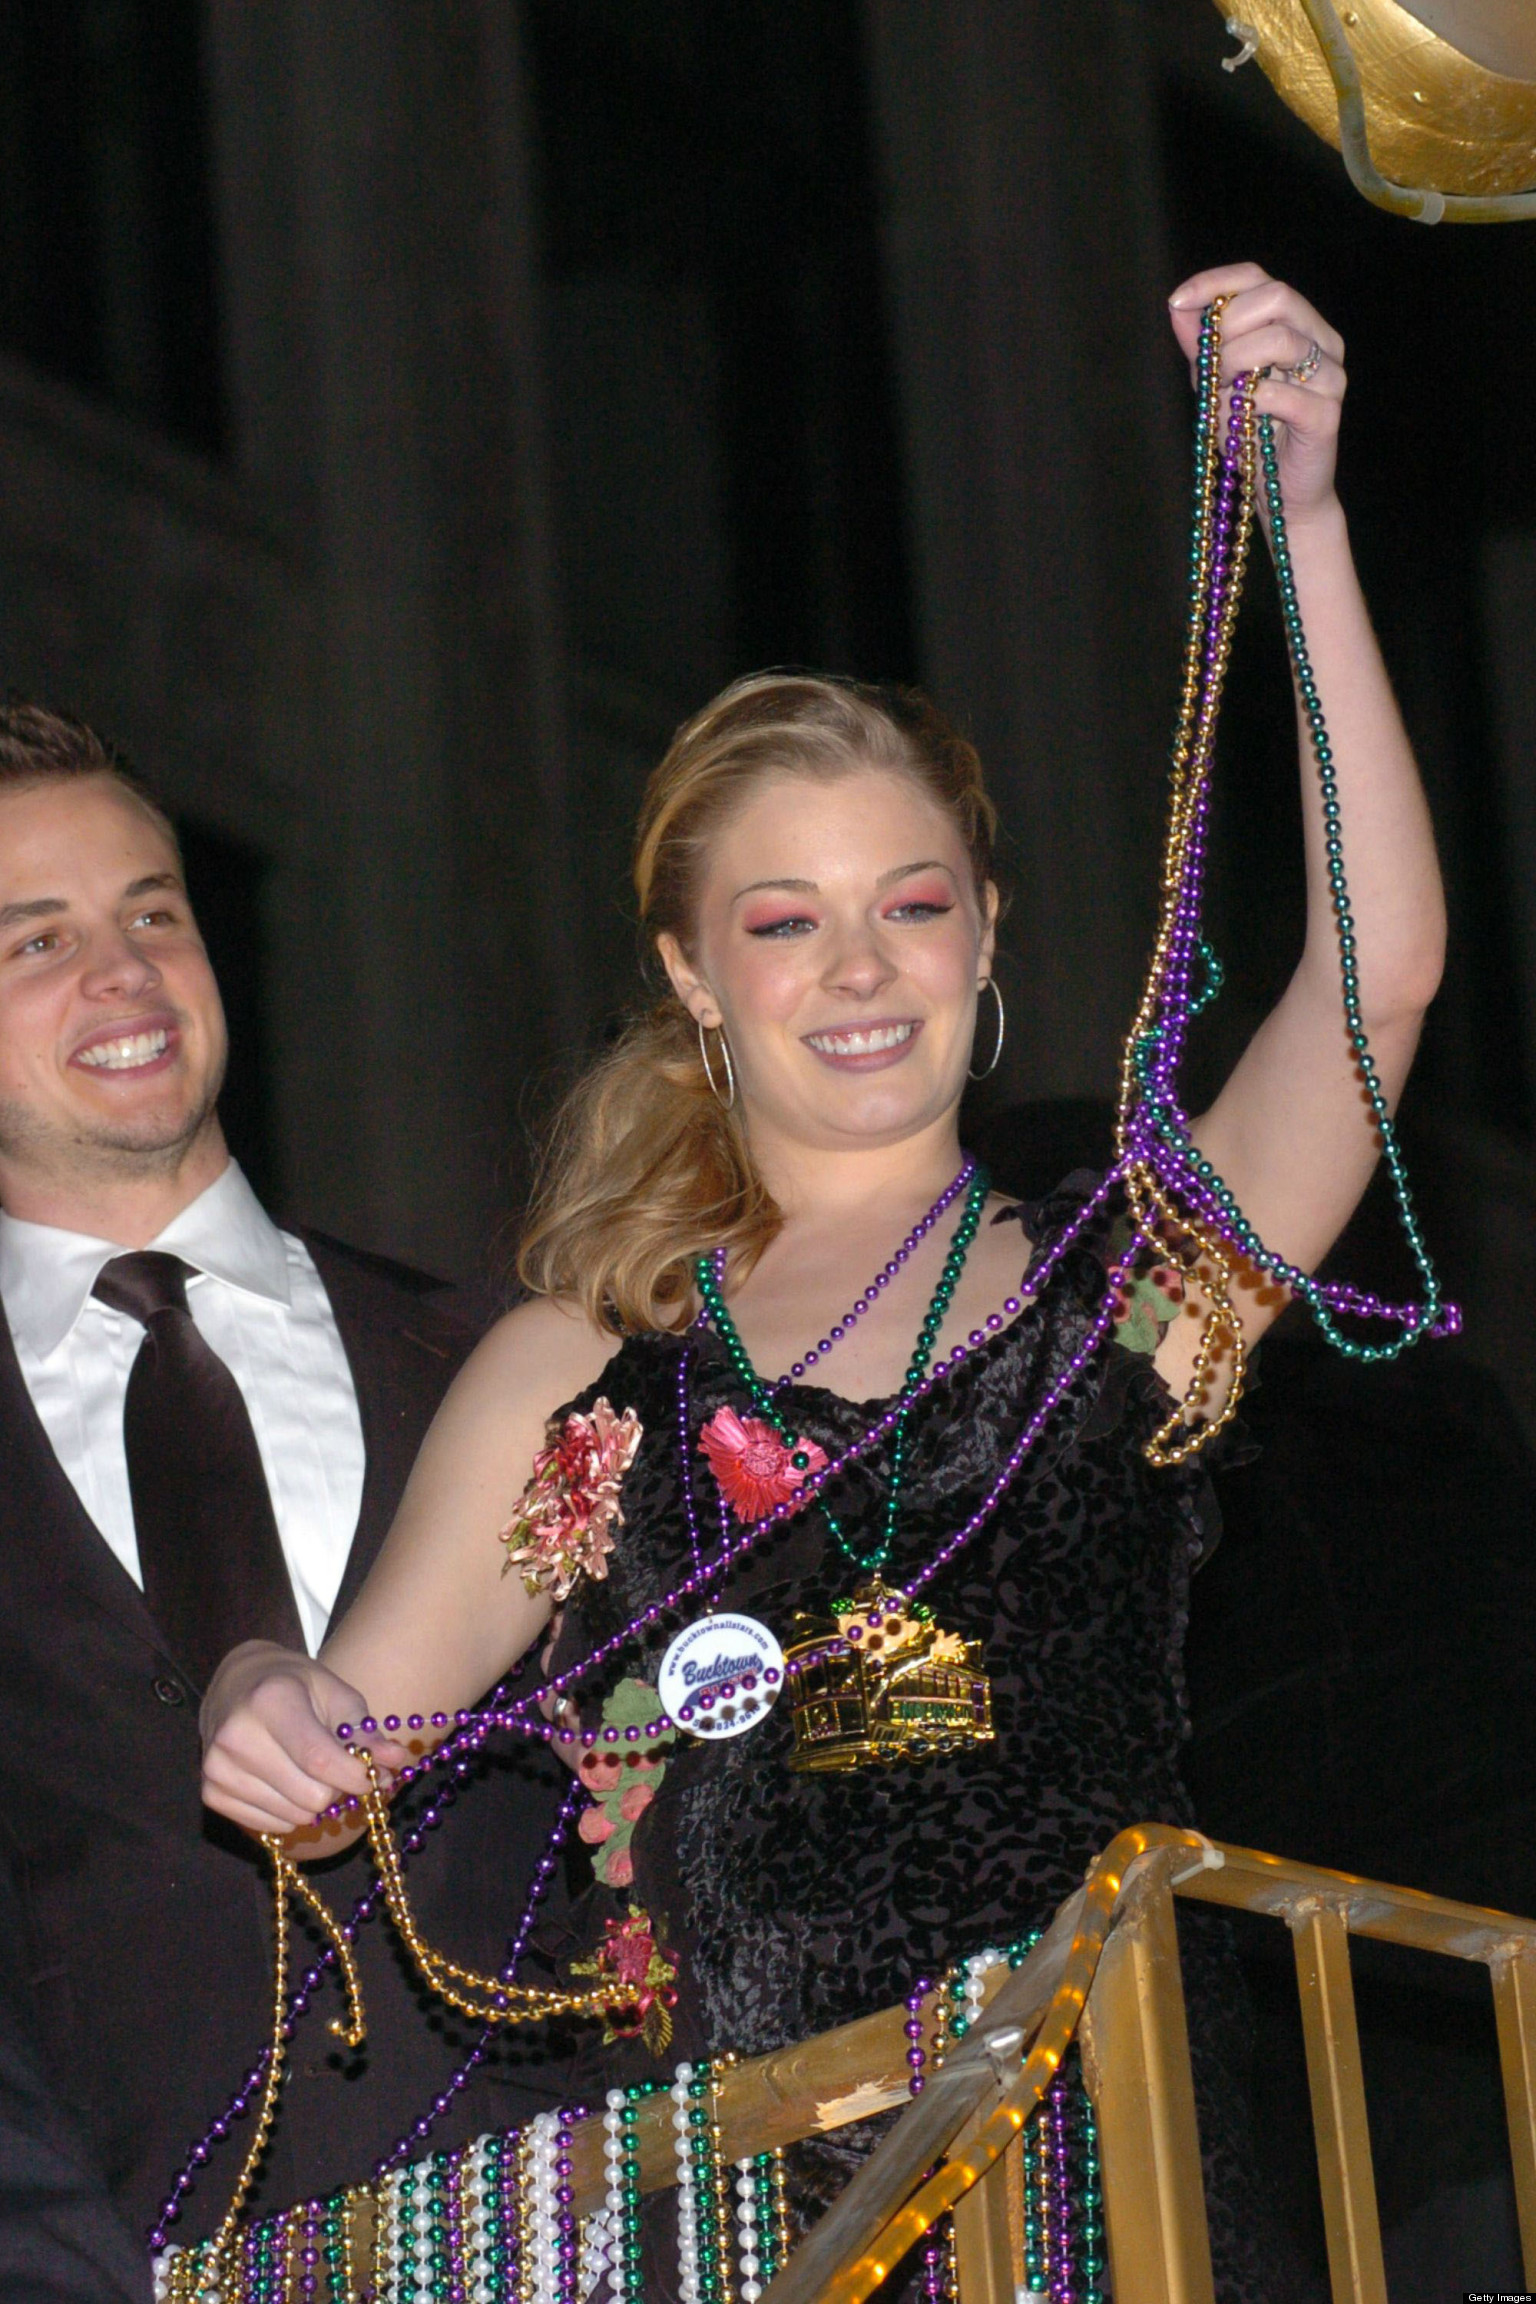 Mardi Gras Celebrities Stars Take To New Orleans For Holiday Revelry